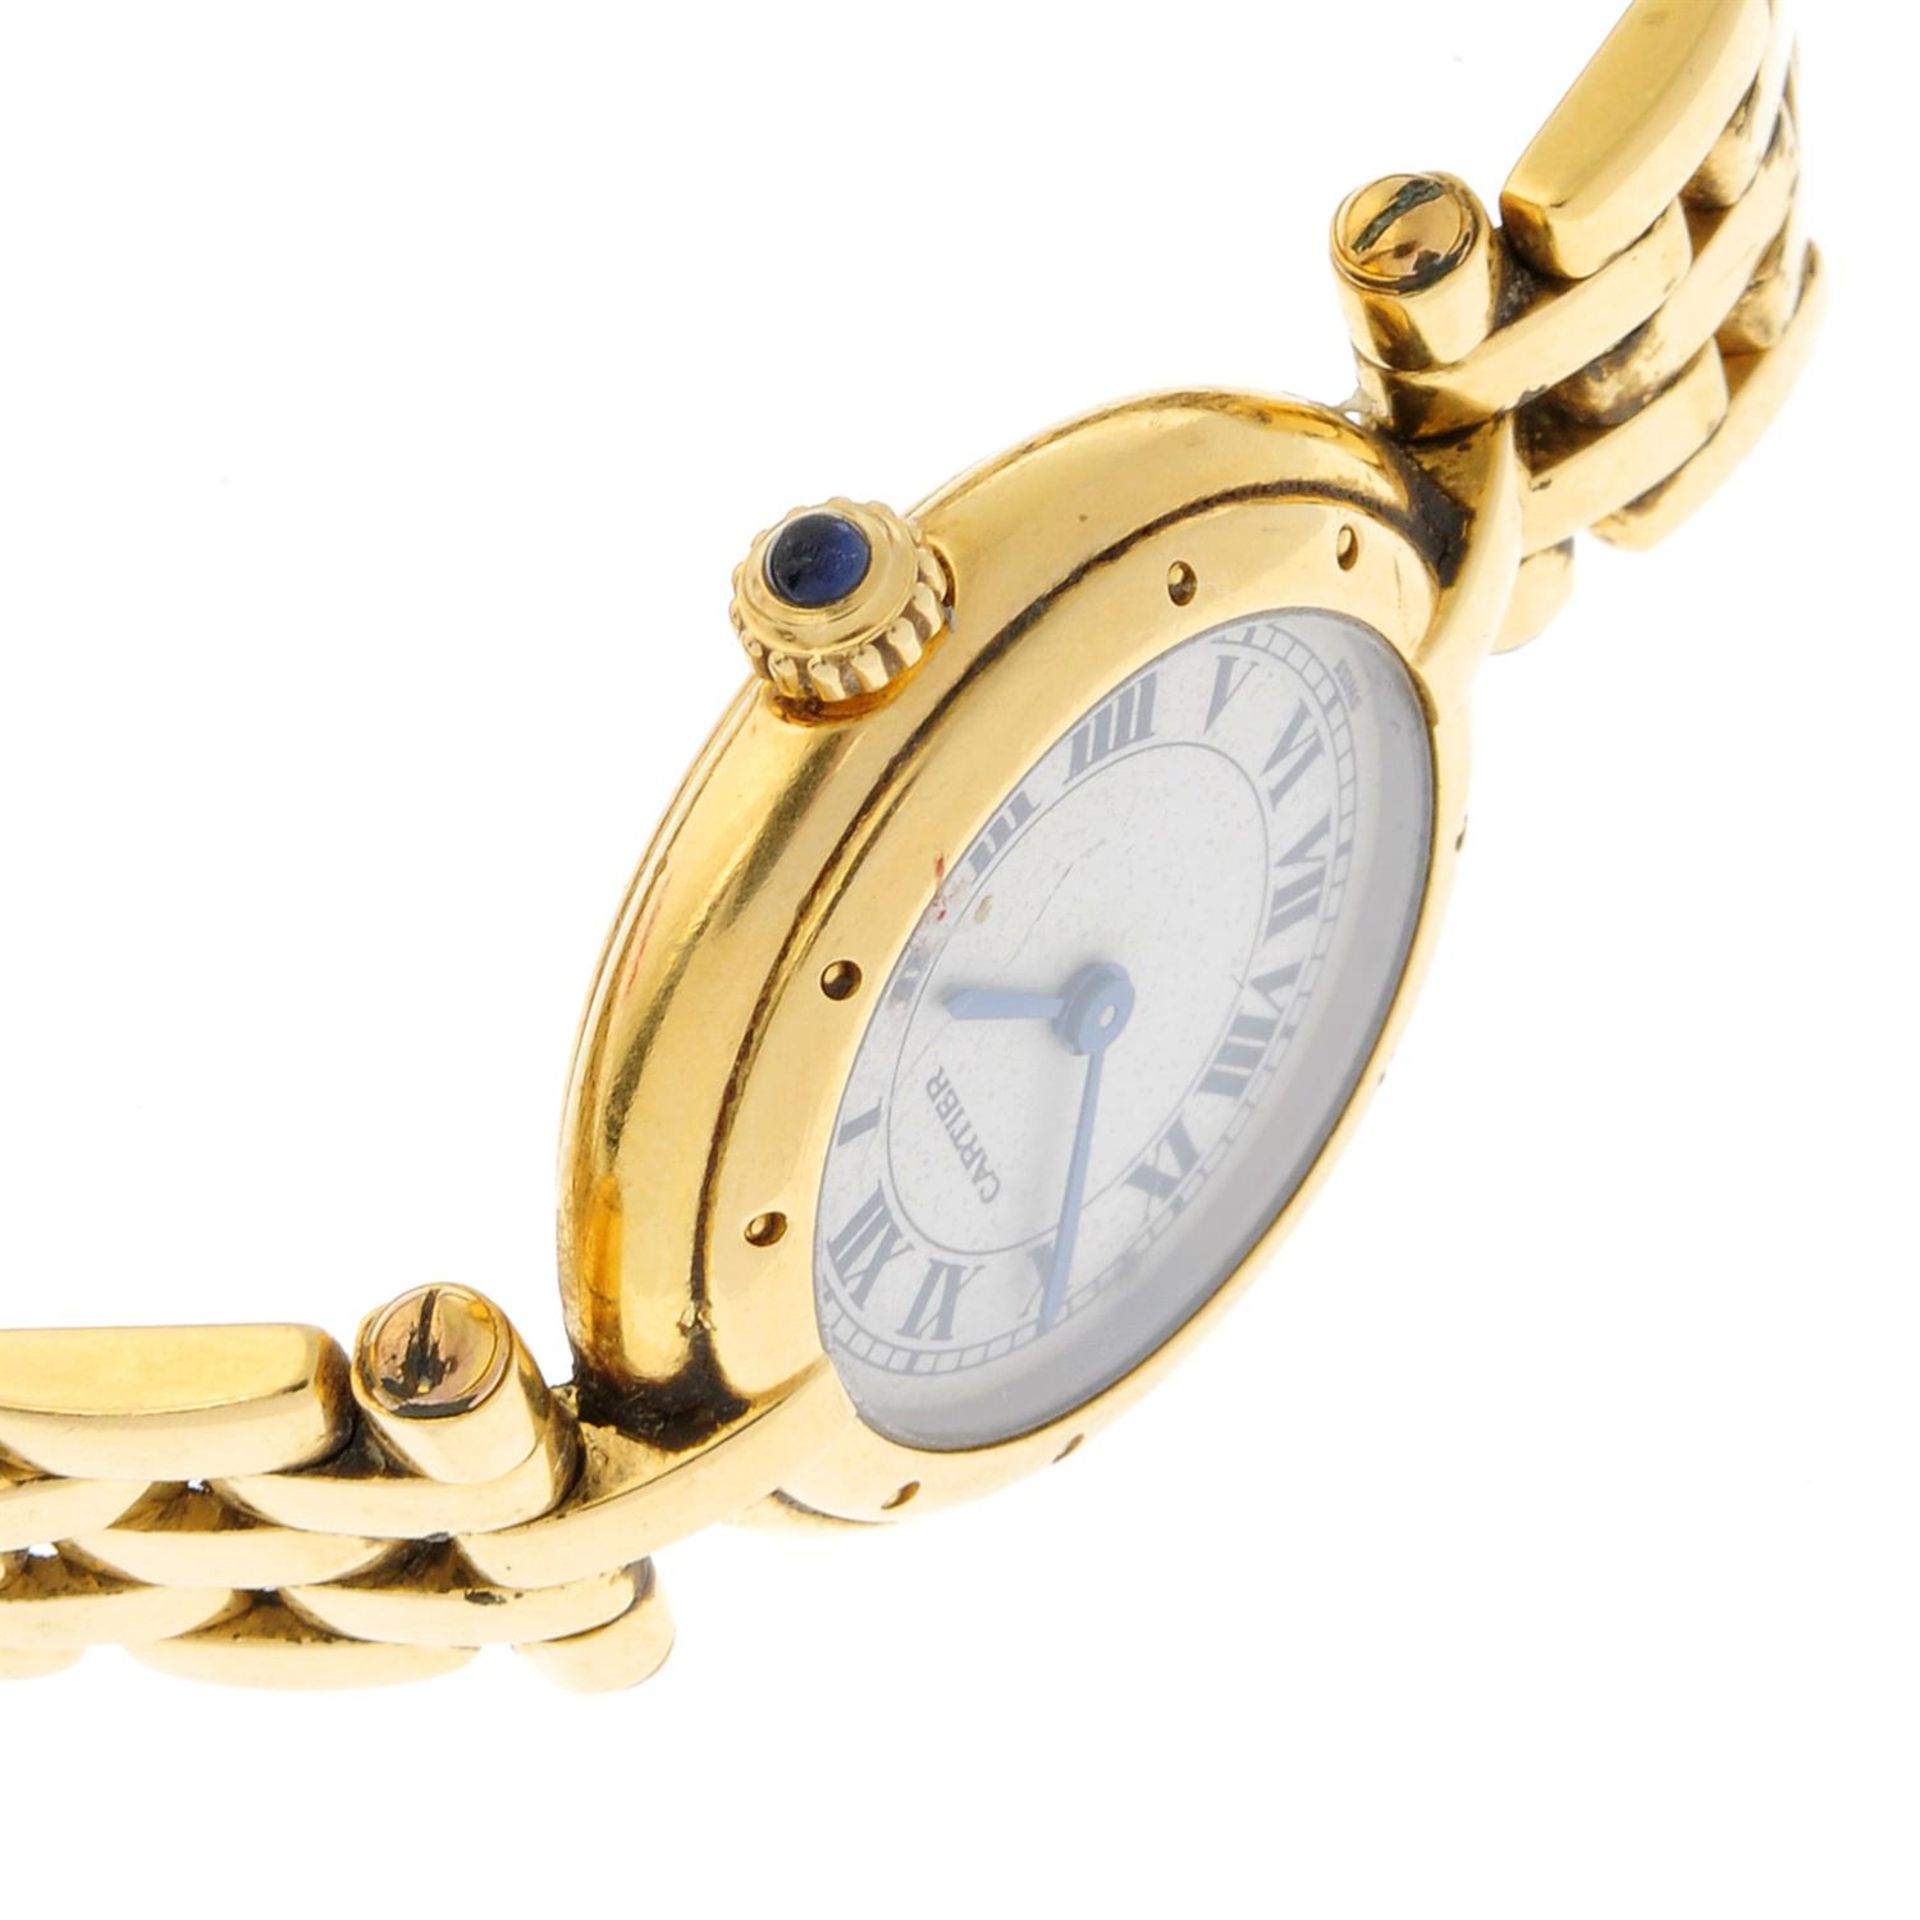 CARTIER - an 18ct yellow gold Panthere Vendome bracelet watch. - Image 3 of 6